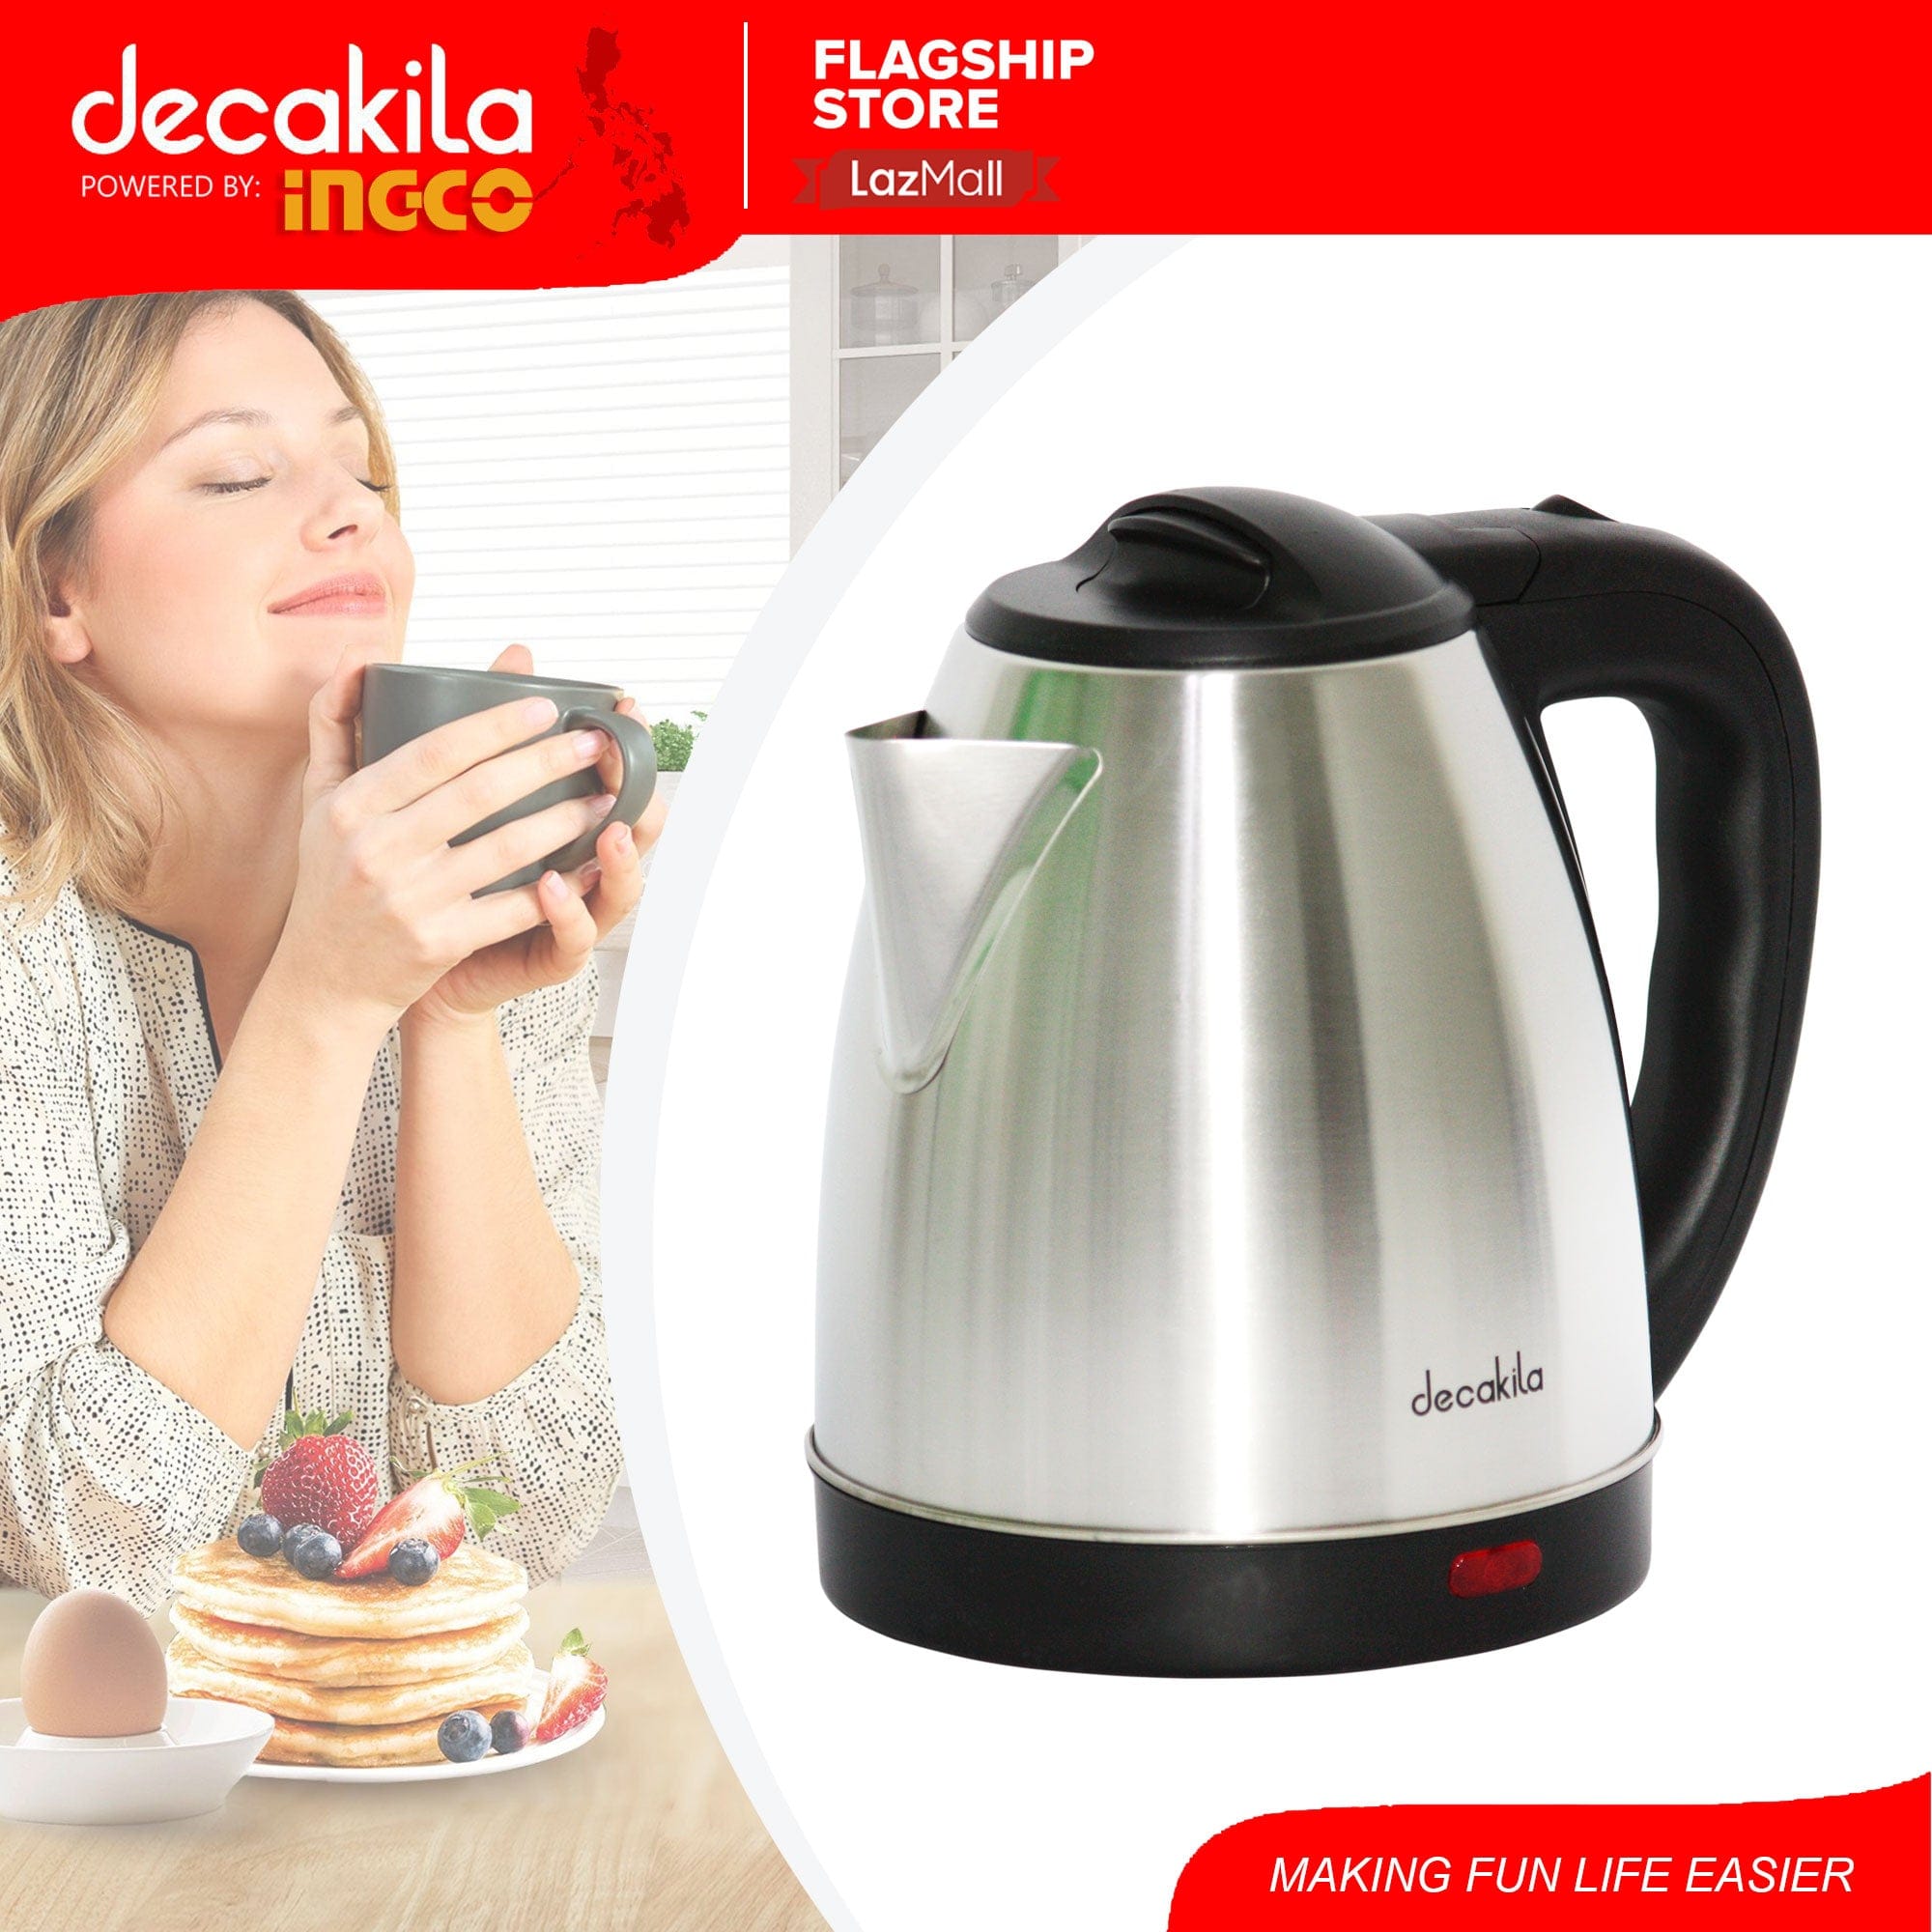 Buy Decakila 1.5L Stainless Steel Electric Kettle 1800W - KEKT002B in Ghana | Supply Master Electric Kettle Buy Tools hardware Building materials